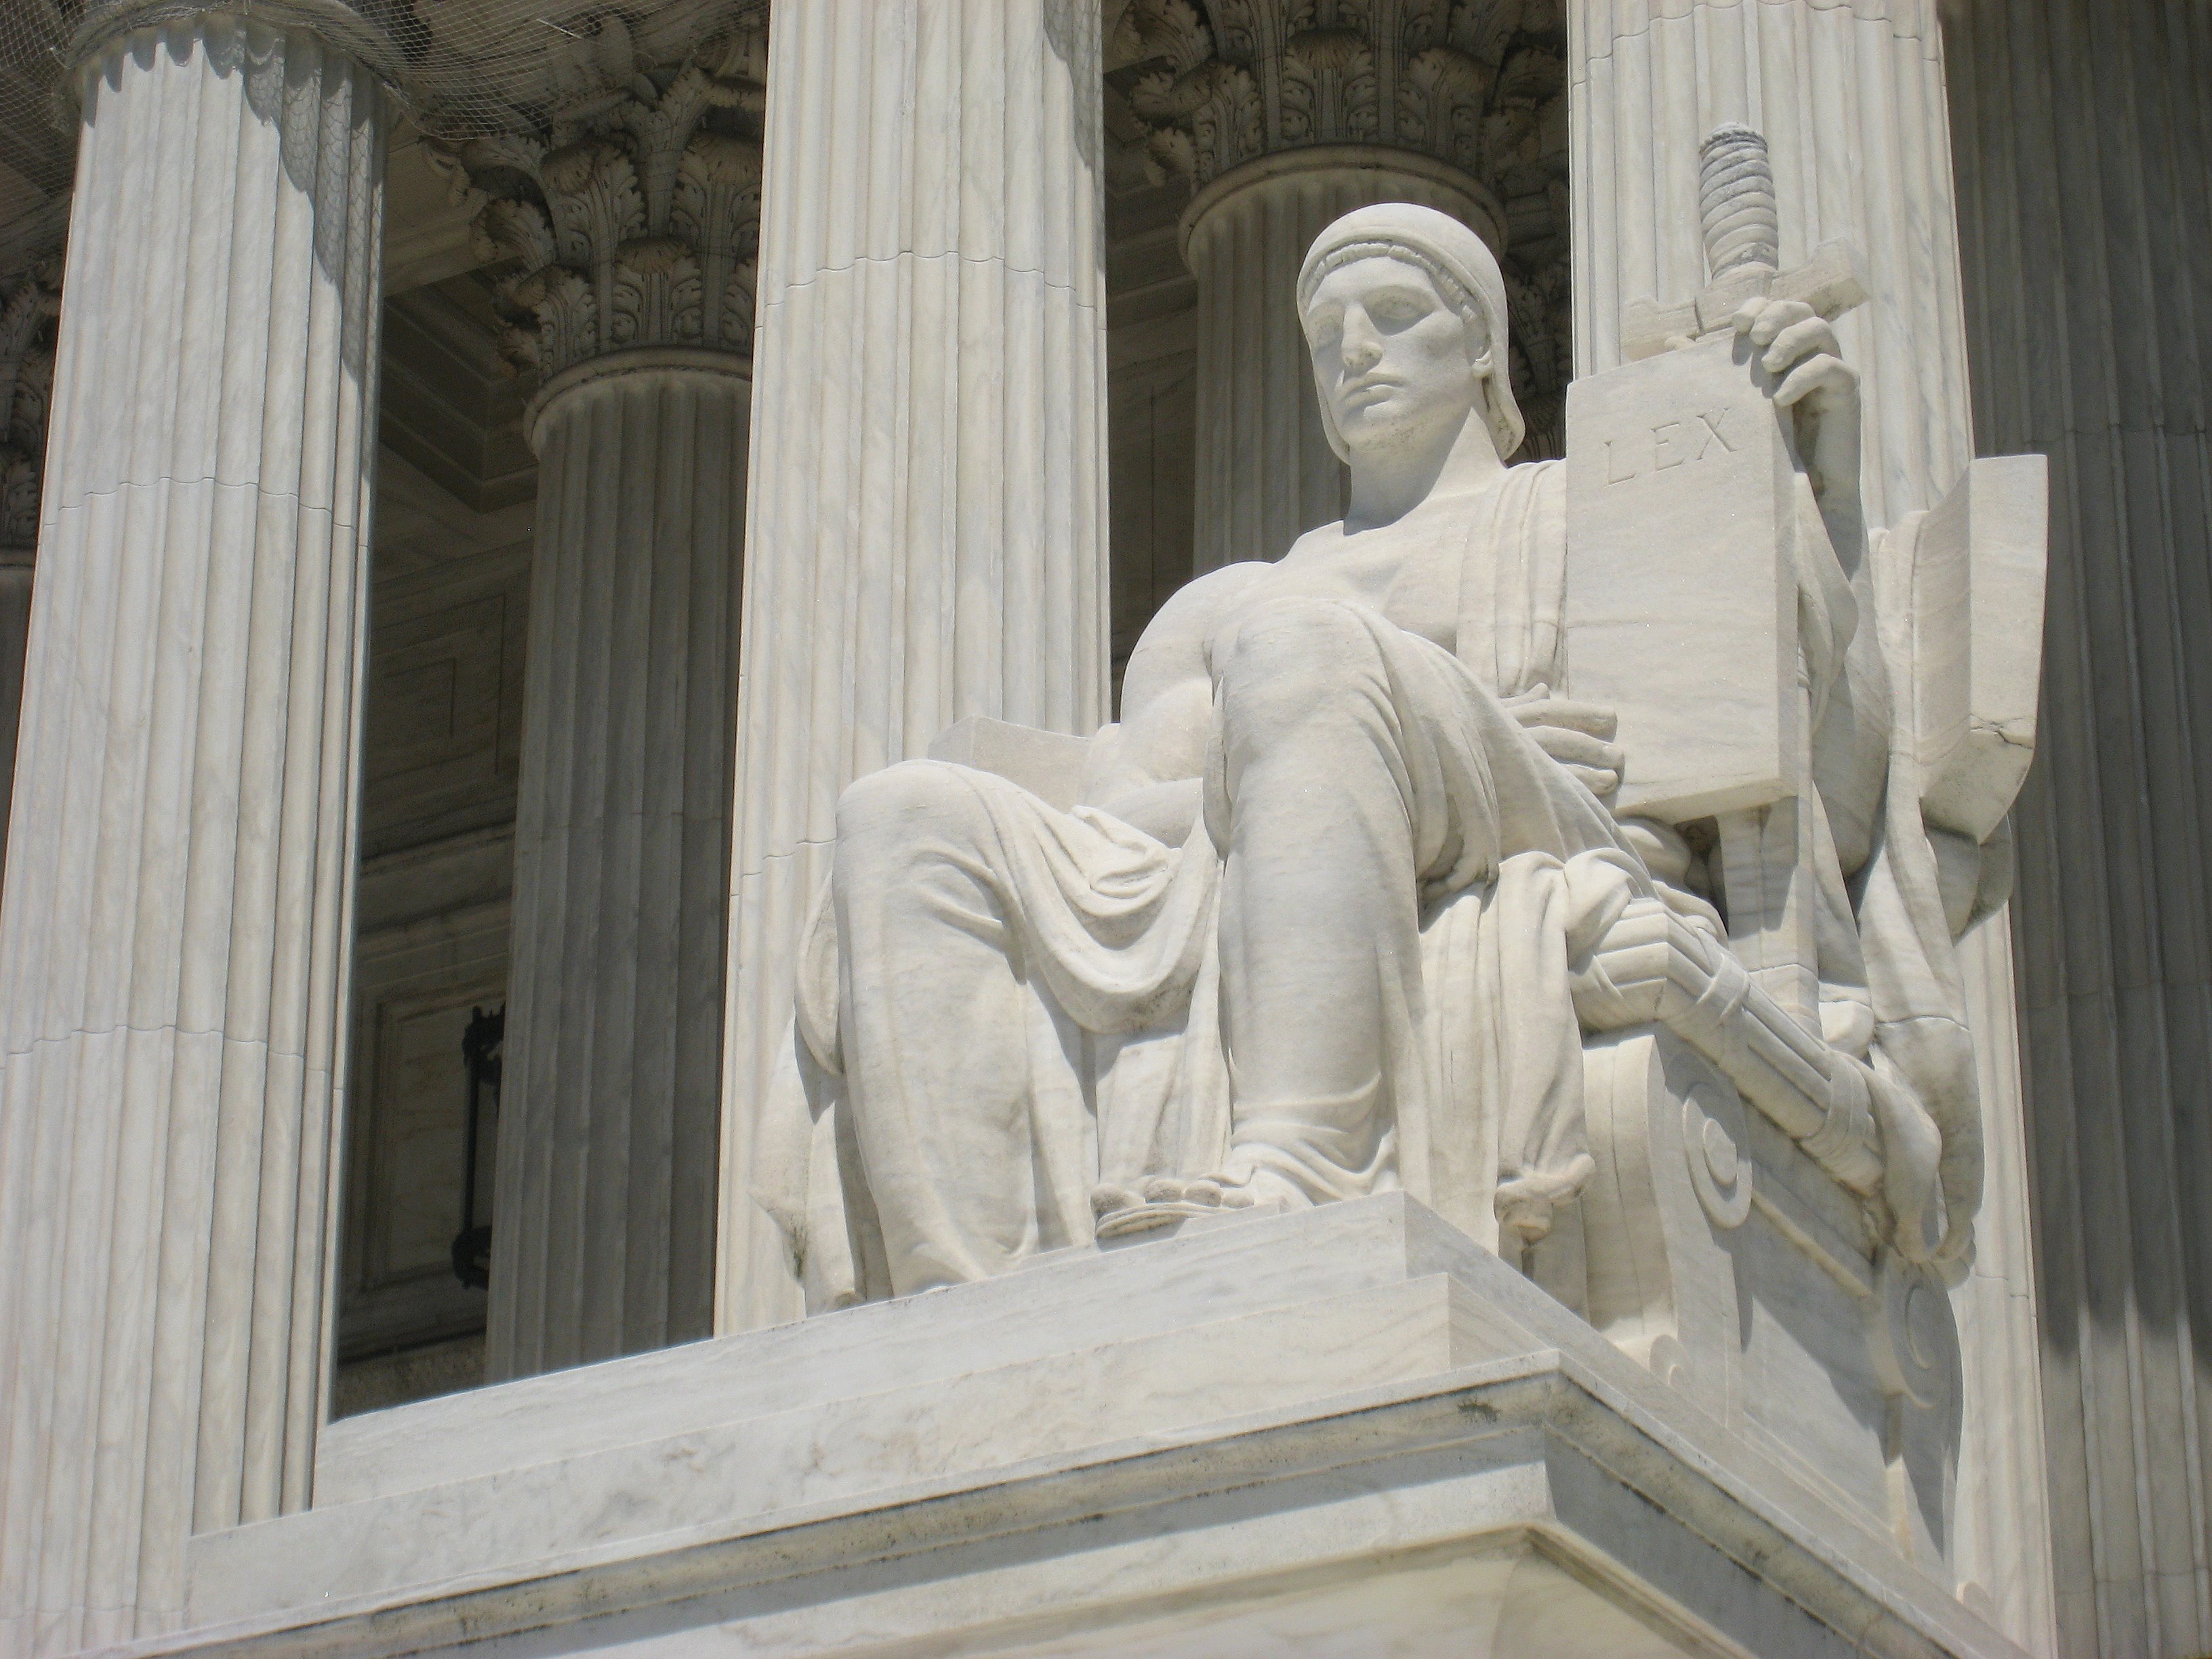 Photo of a white marble sculpture, sitting in front of the massive marble columns of the US Supreme Court building. The sculpture is of a seated man, wearing a draped robe and a head covering, and holding a sword in his left hand. His right right arm is across his lap, and in both hands he steadies a stone tablet that reads, "LEX."